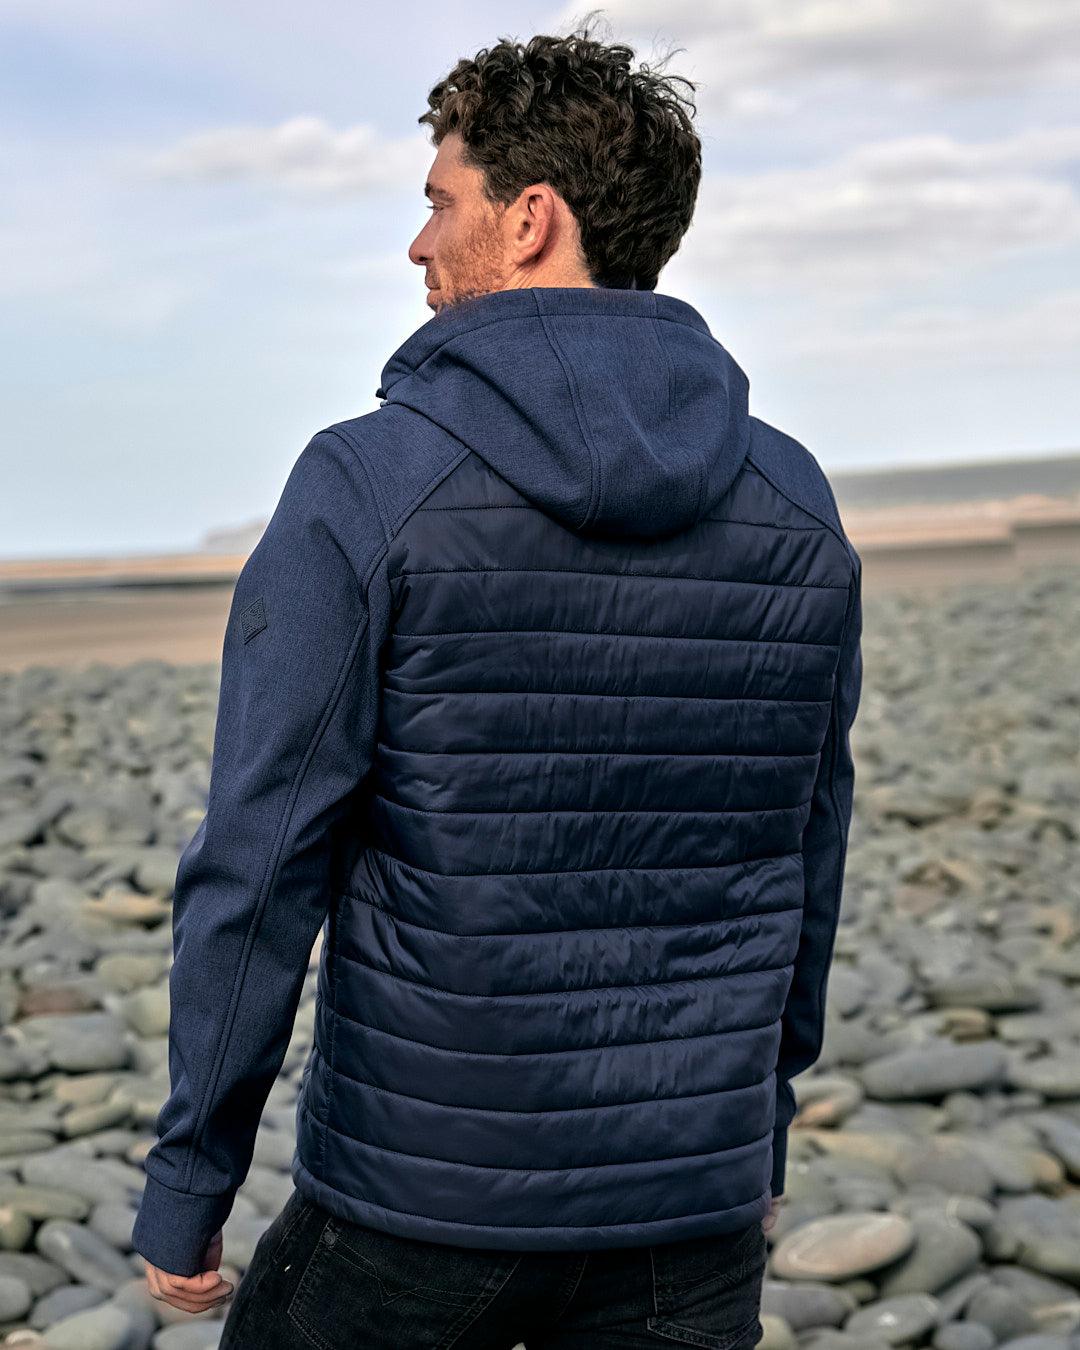 The back of a man wearing a Saltrock Purbeck Padded Jacket - Dark Blue, perfect for outdoor adventures.